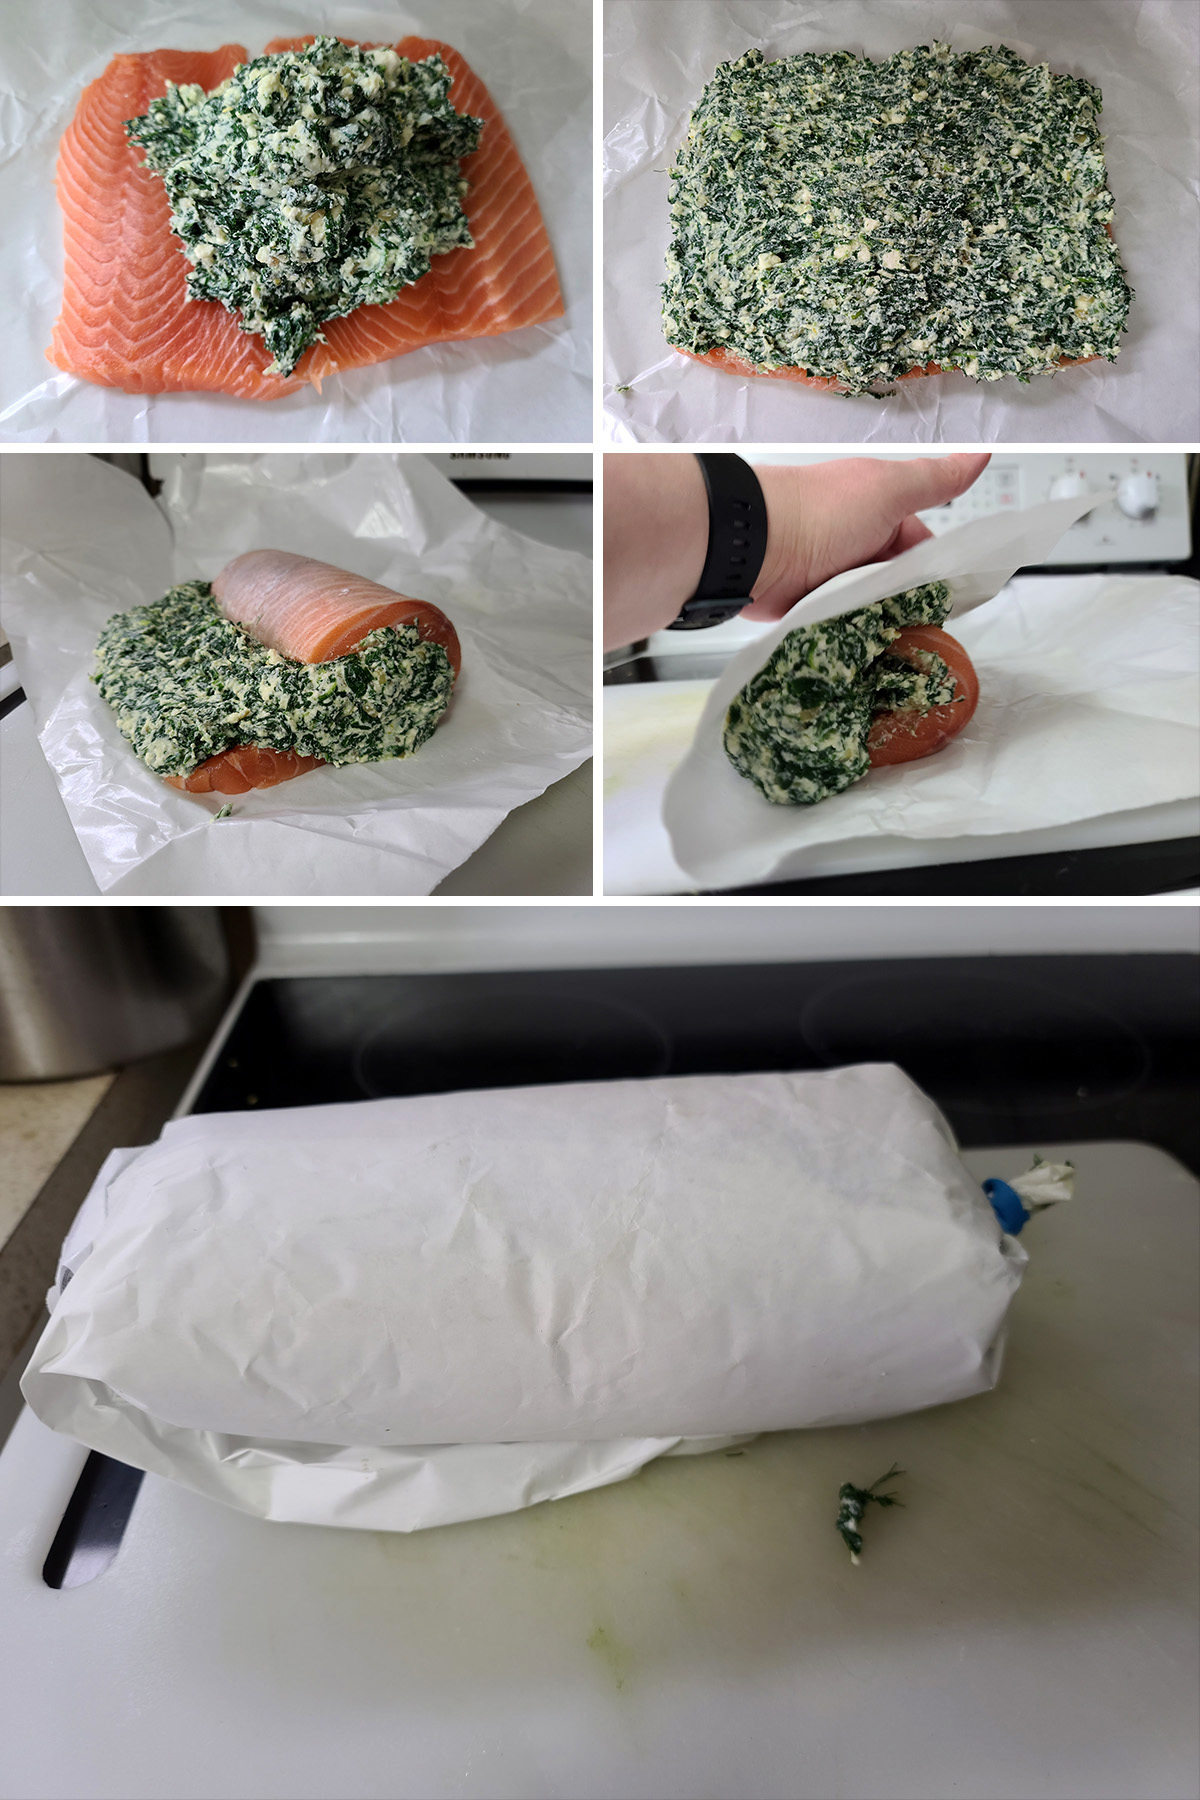 A 5 part image showing the filling being spread on the salmon, then the salmon being rolled up in parchment paper.